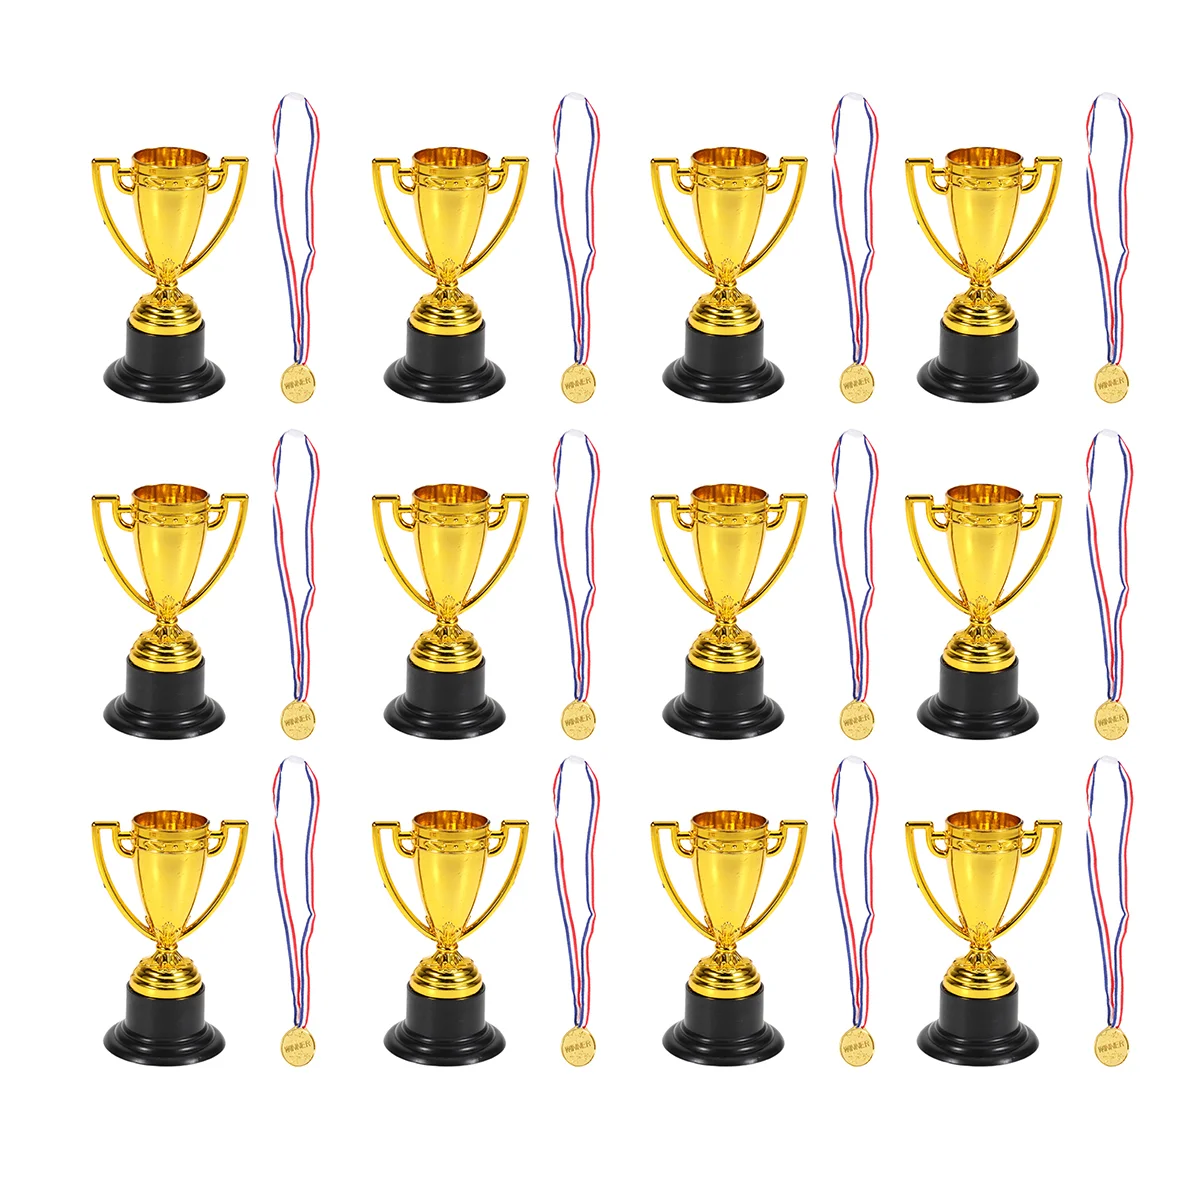 

Trophy Trophies Cup Kids Medals Awards Mini Award Gold Trophys Soccer Toy Winner Prize Adults World Medal Funny Party Football